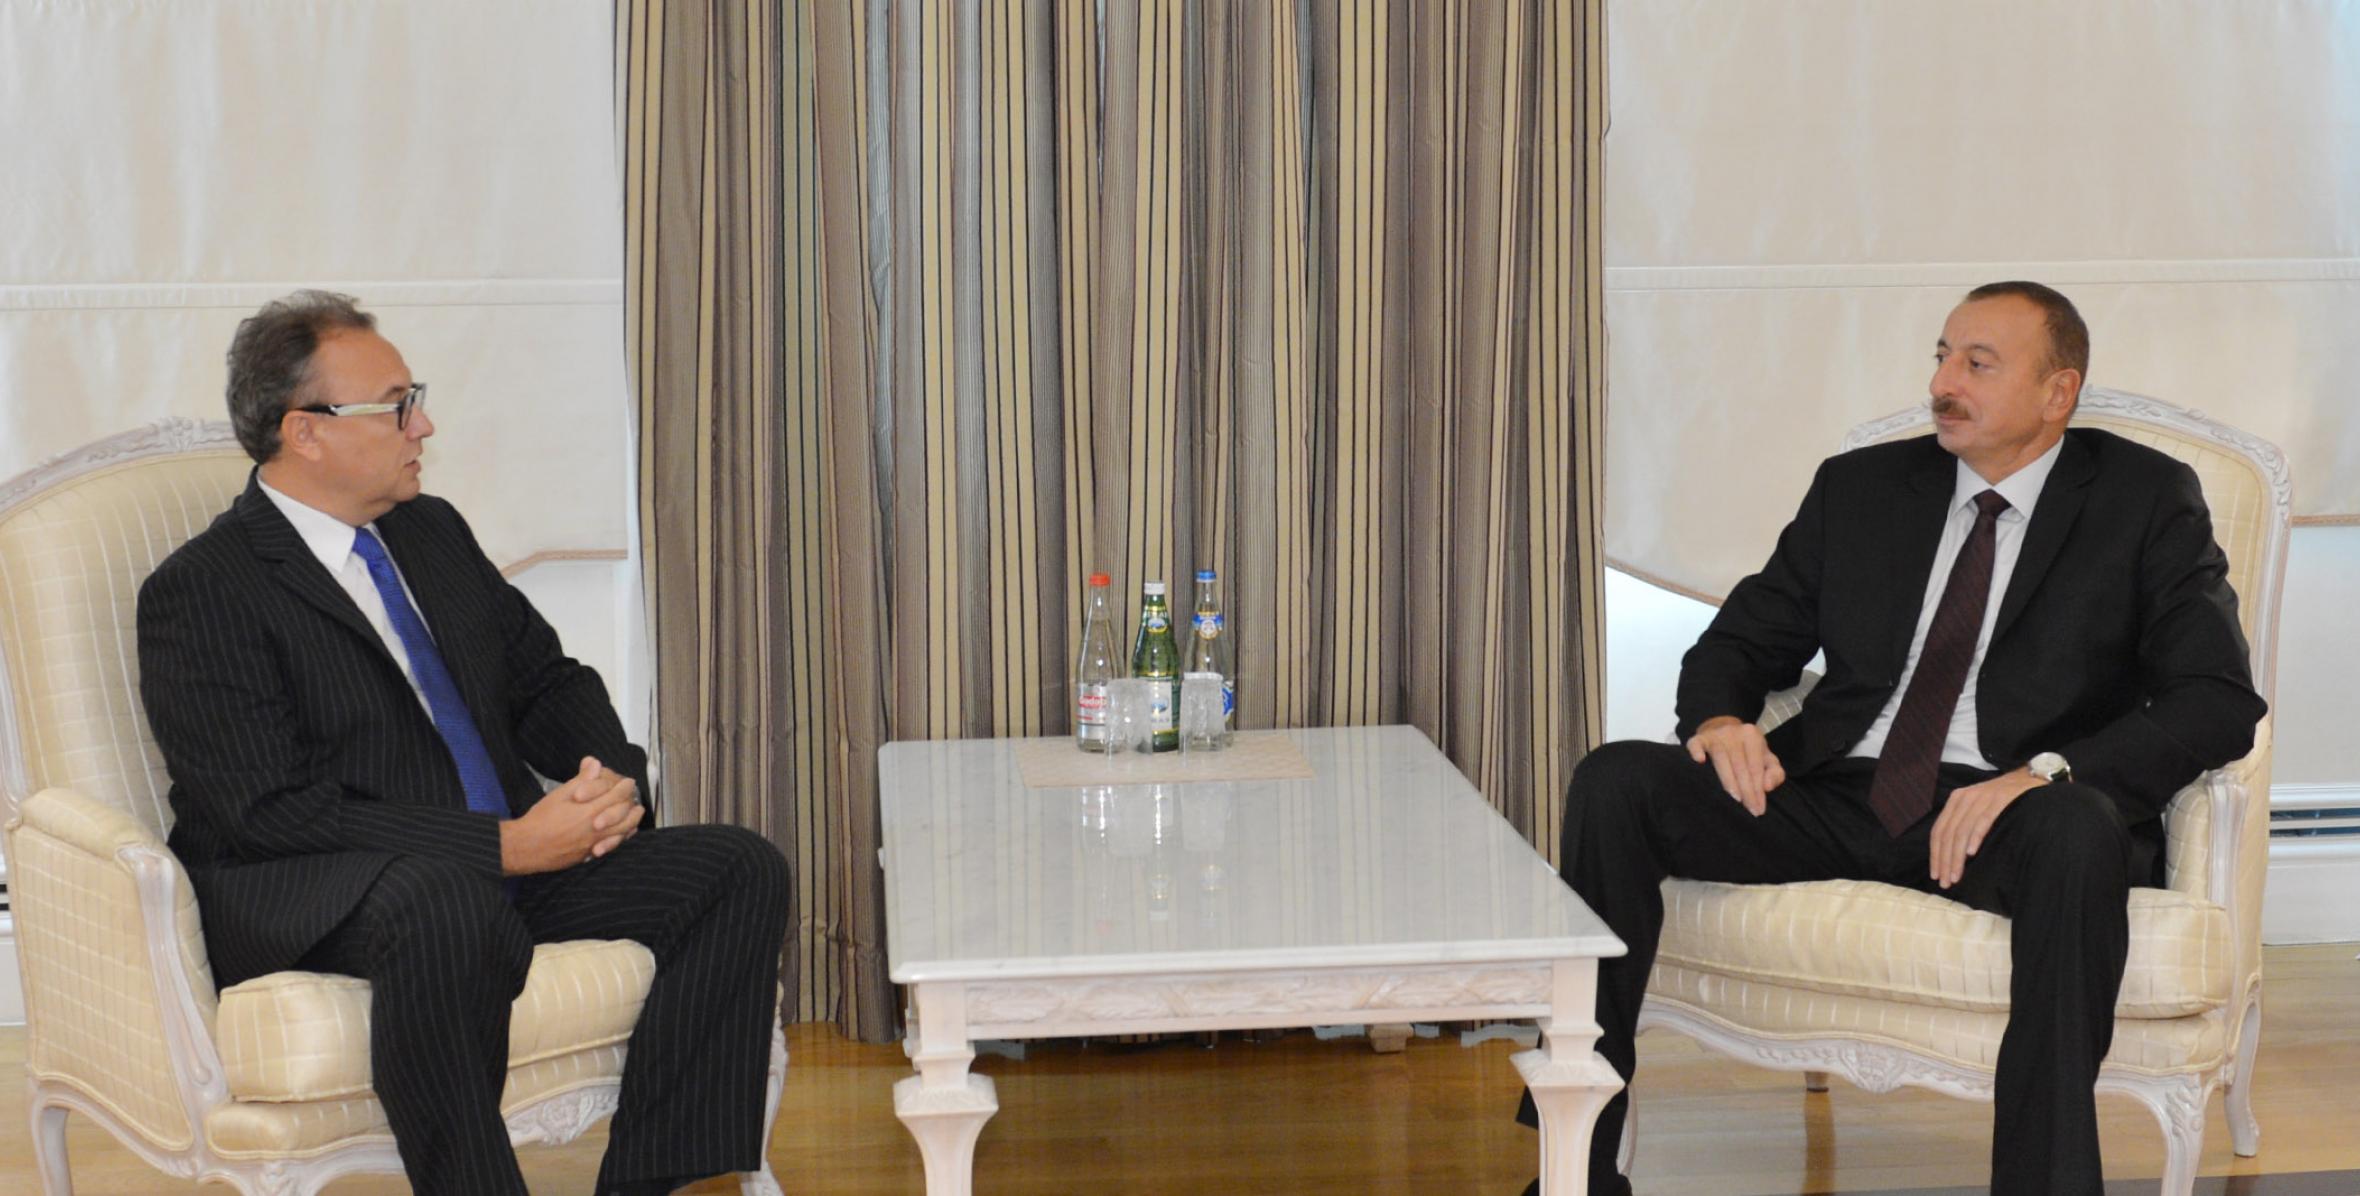 Ilham Aliyev received the Ambassador of Lithuania to Azerbaijan, Arturas Zurauskas, at the end of his diplomatic mission in the country